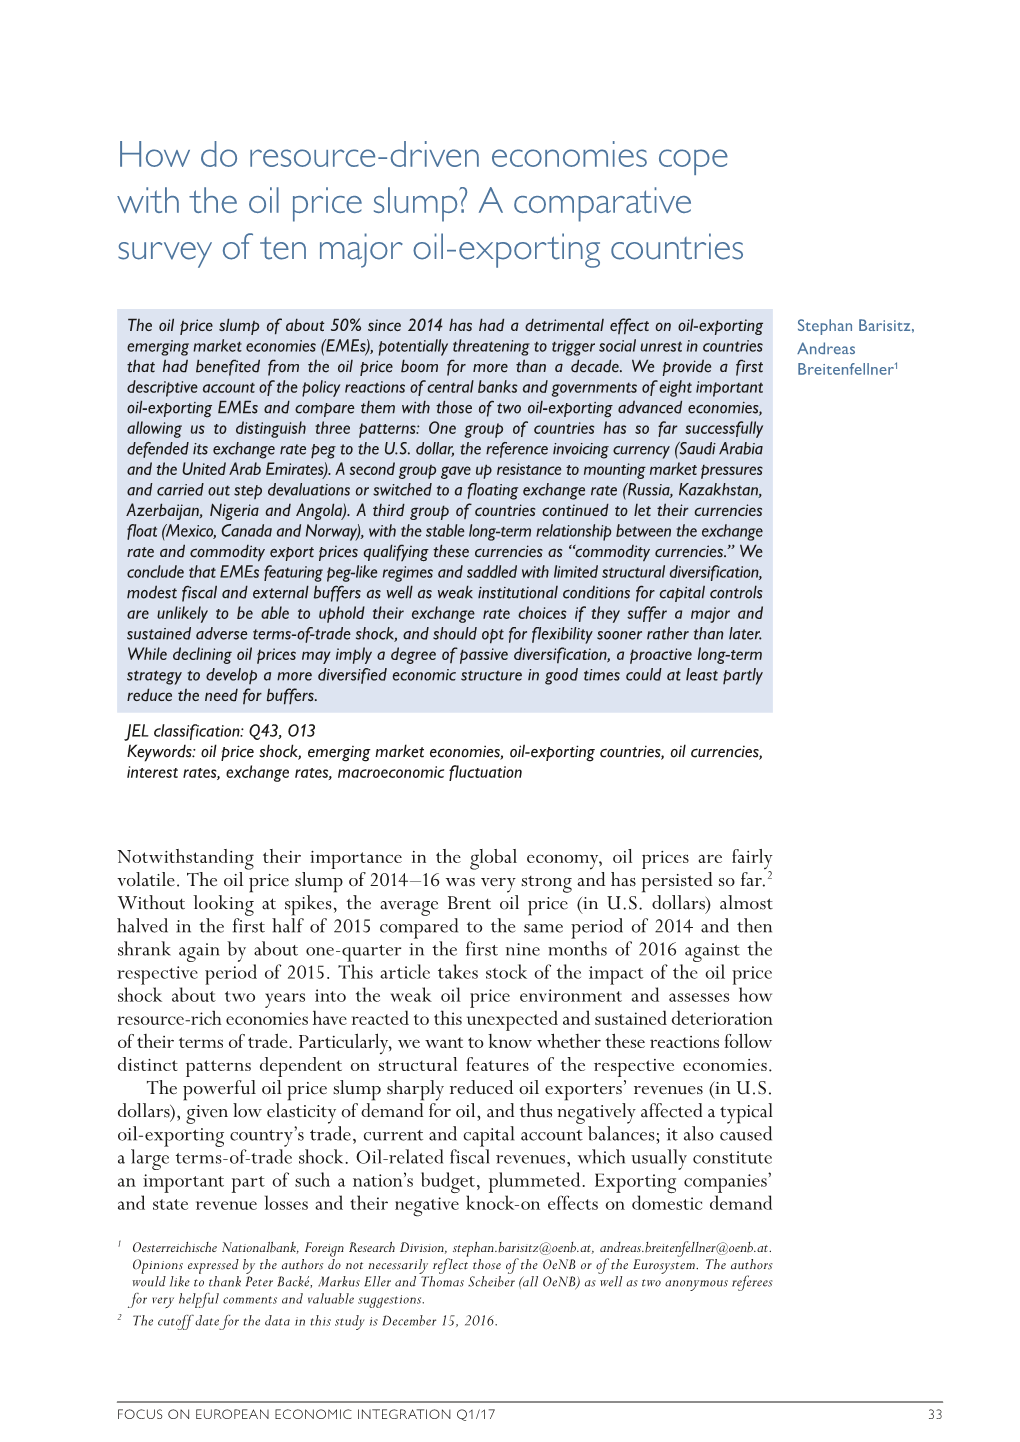 A Comparative Survey of Ten Major Oil-Exporting Countries